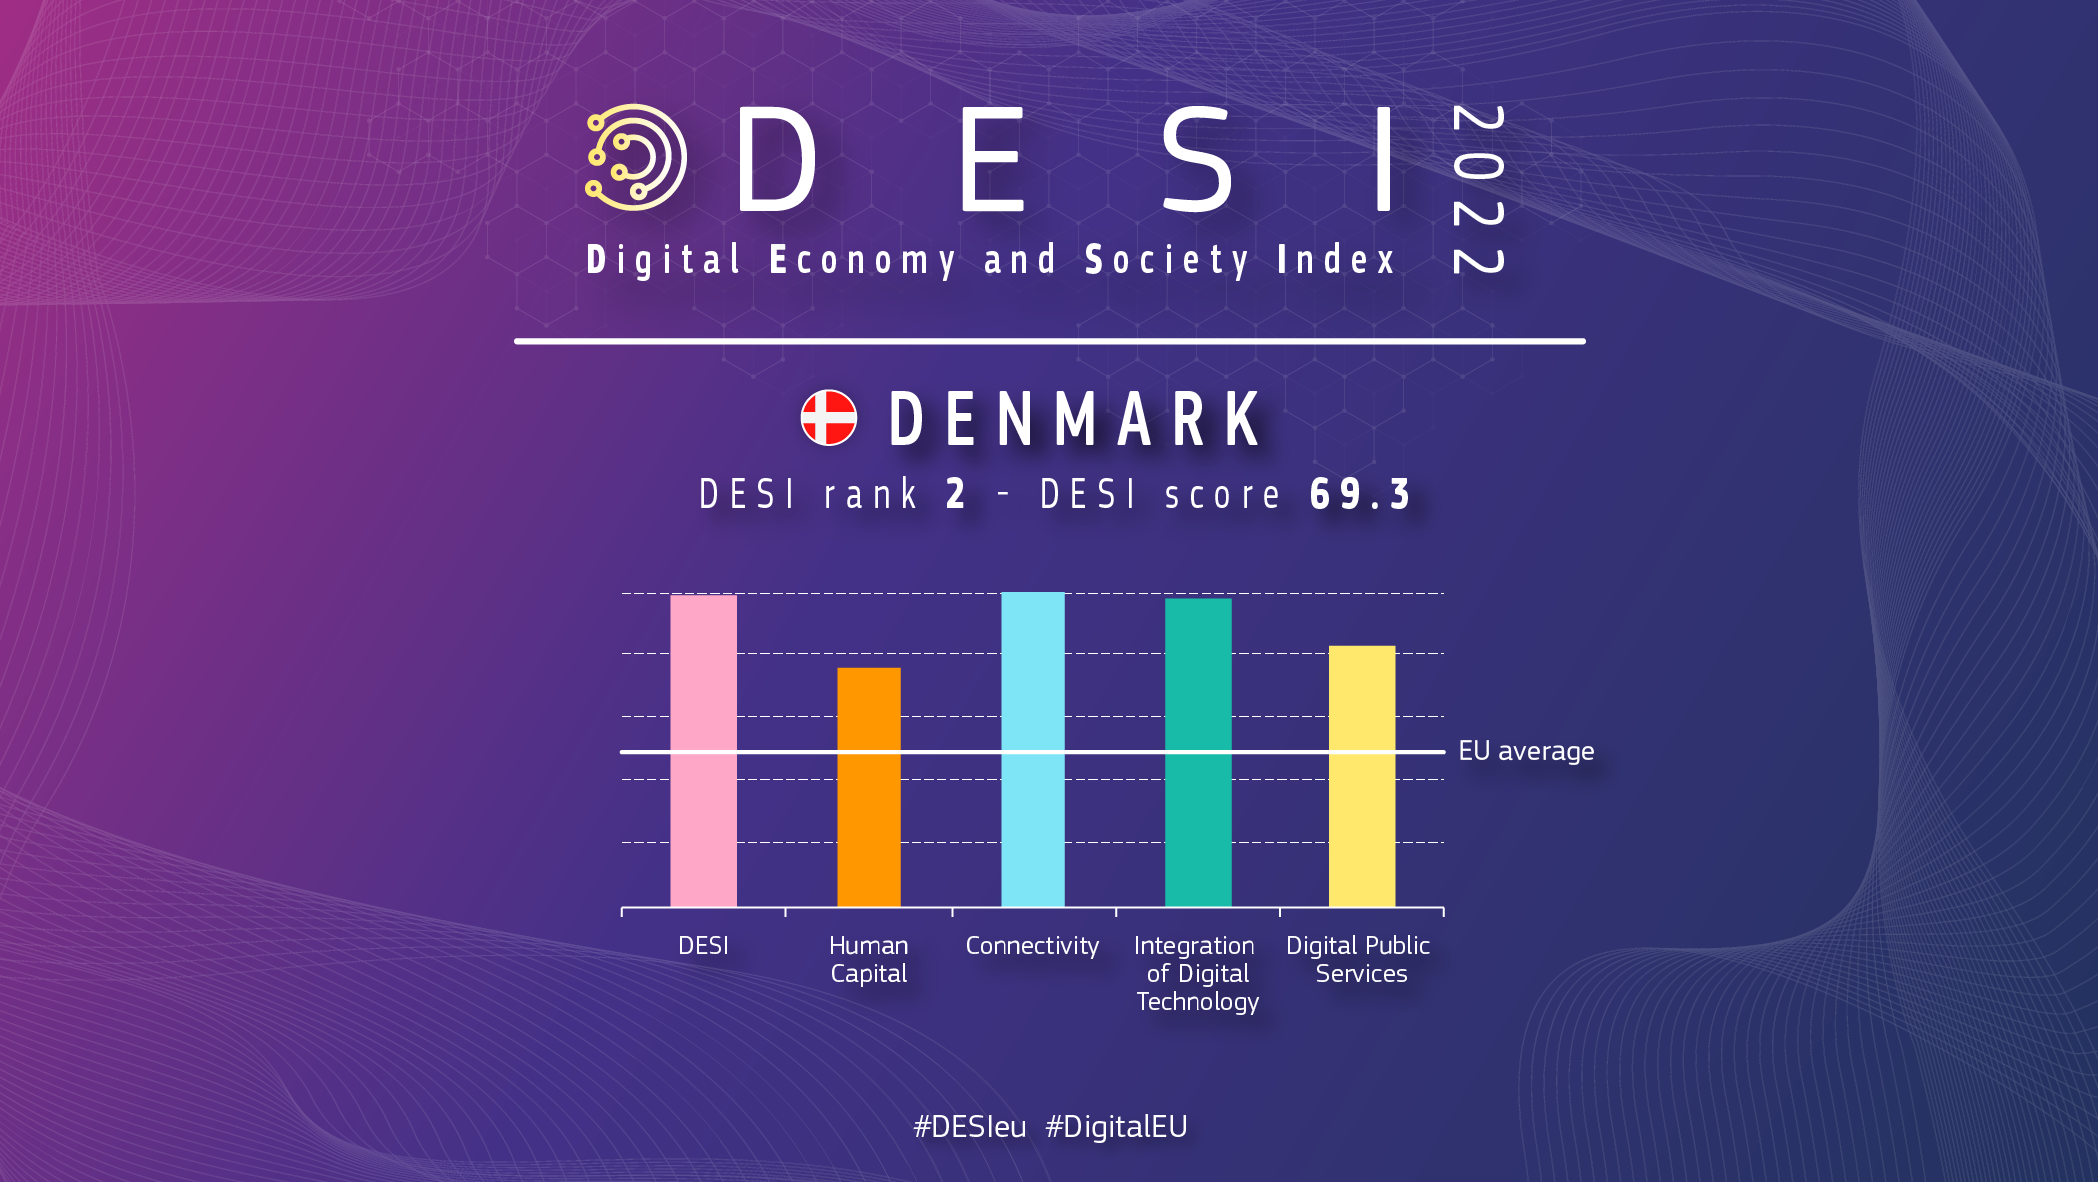 Graphic overview of Denmark in DESI showing a ranking of 2 and a score of 69.3